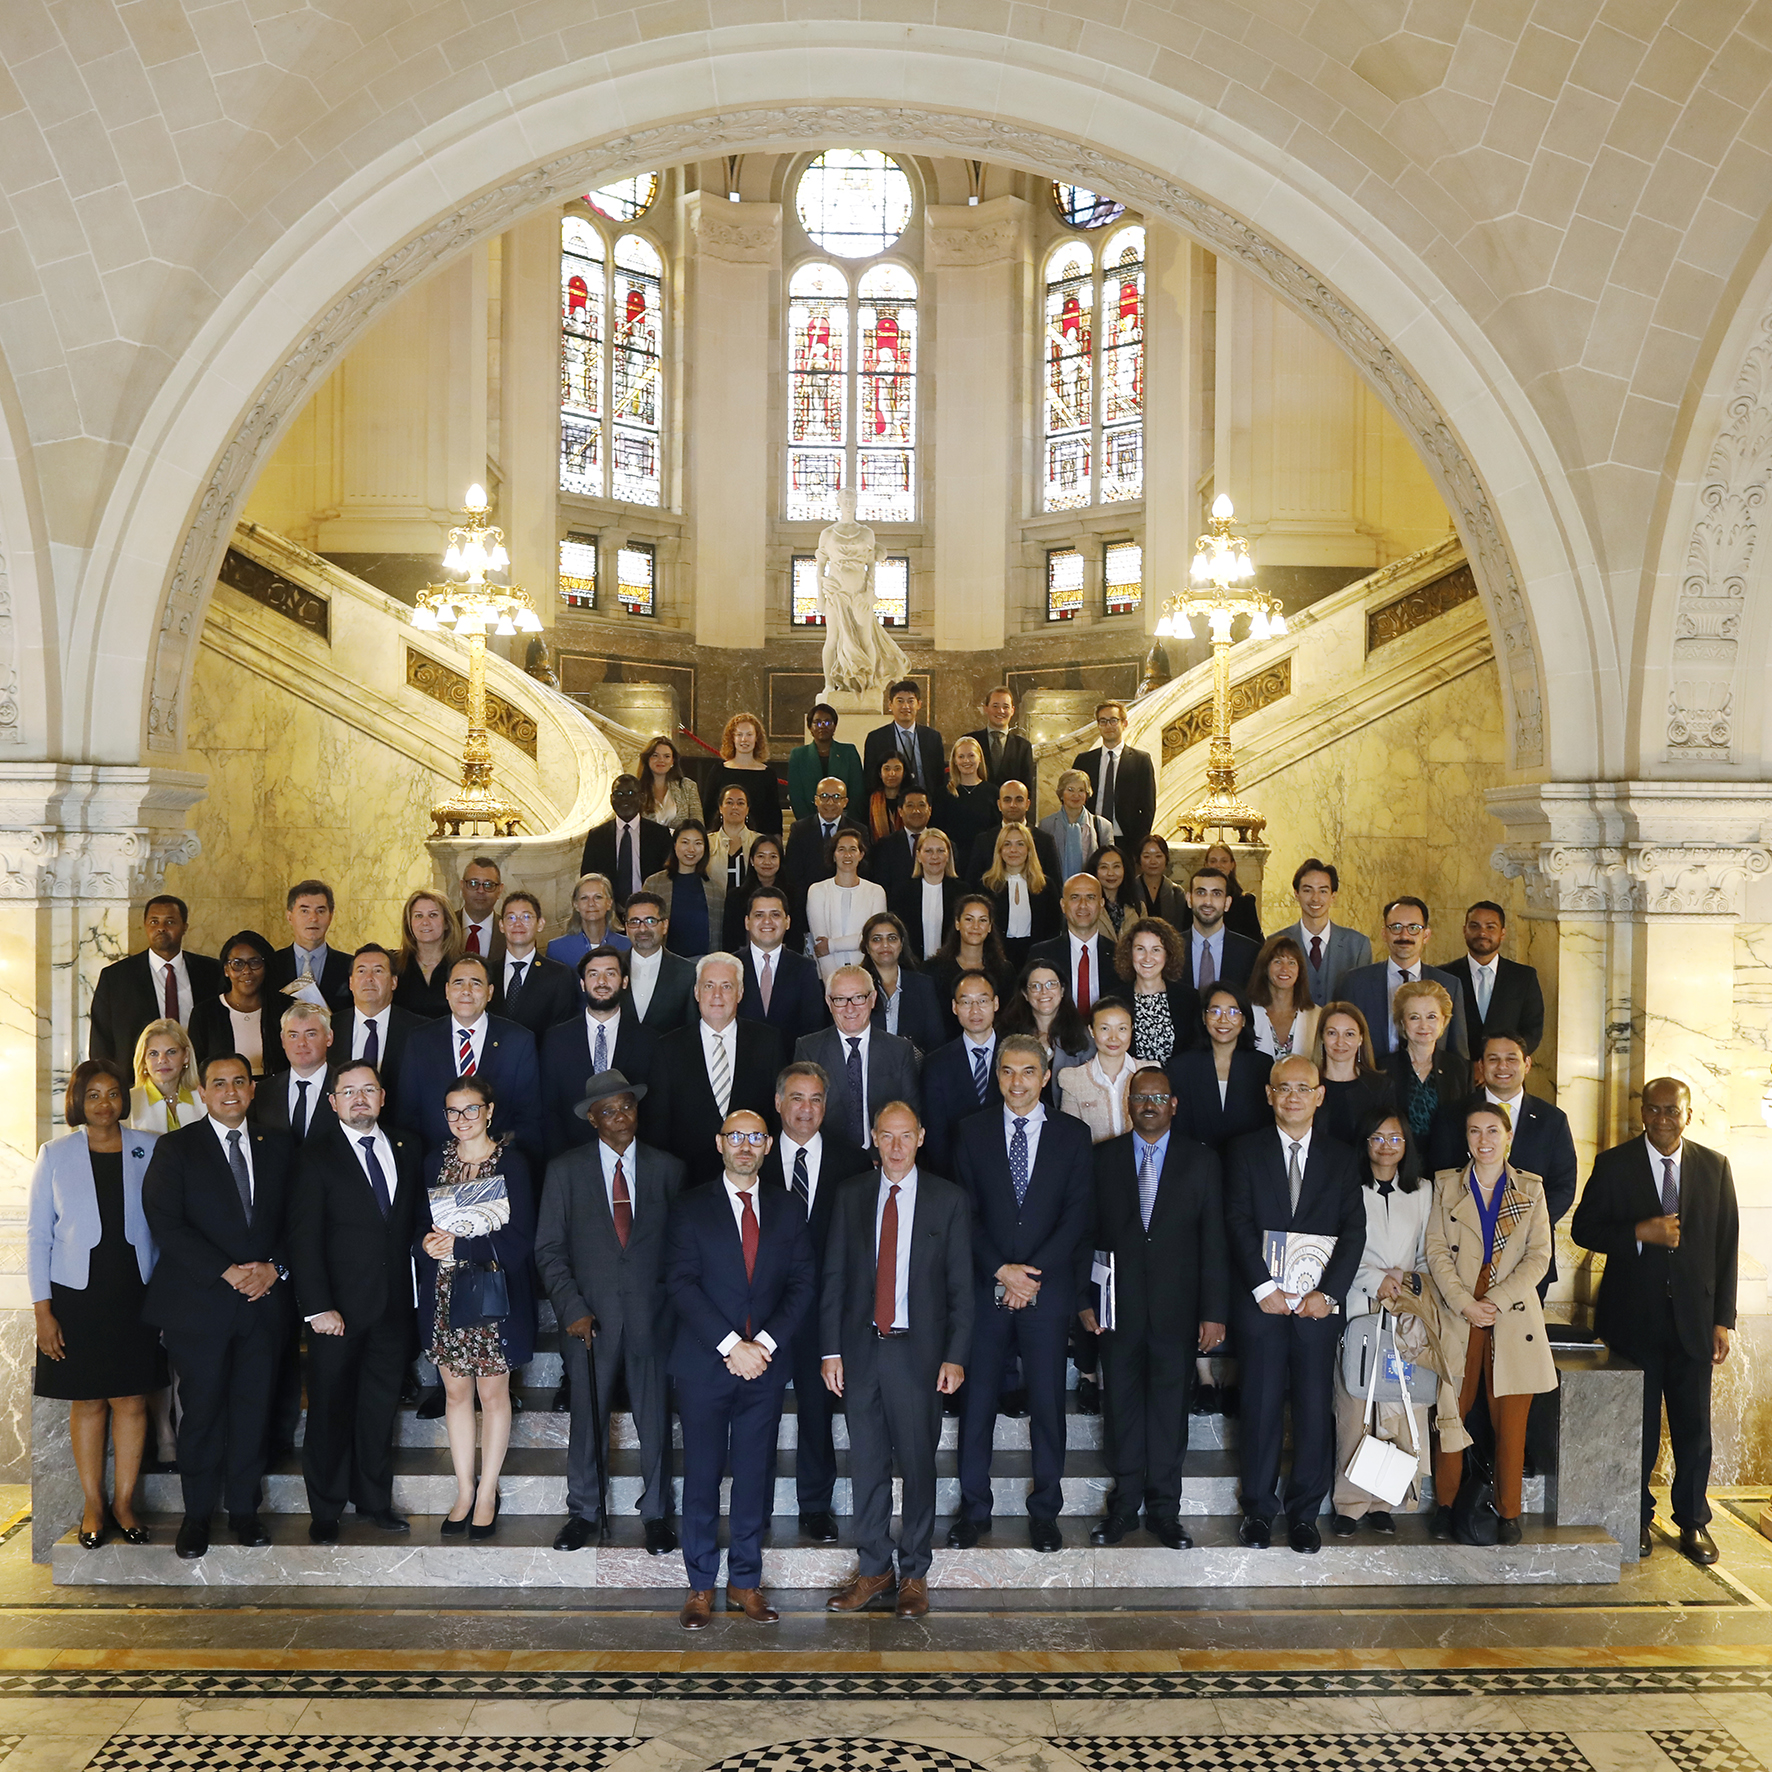 Information session for diplomatic representatives on the activities of the International Court of Justice and the Permanent Court of Arbitration